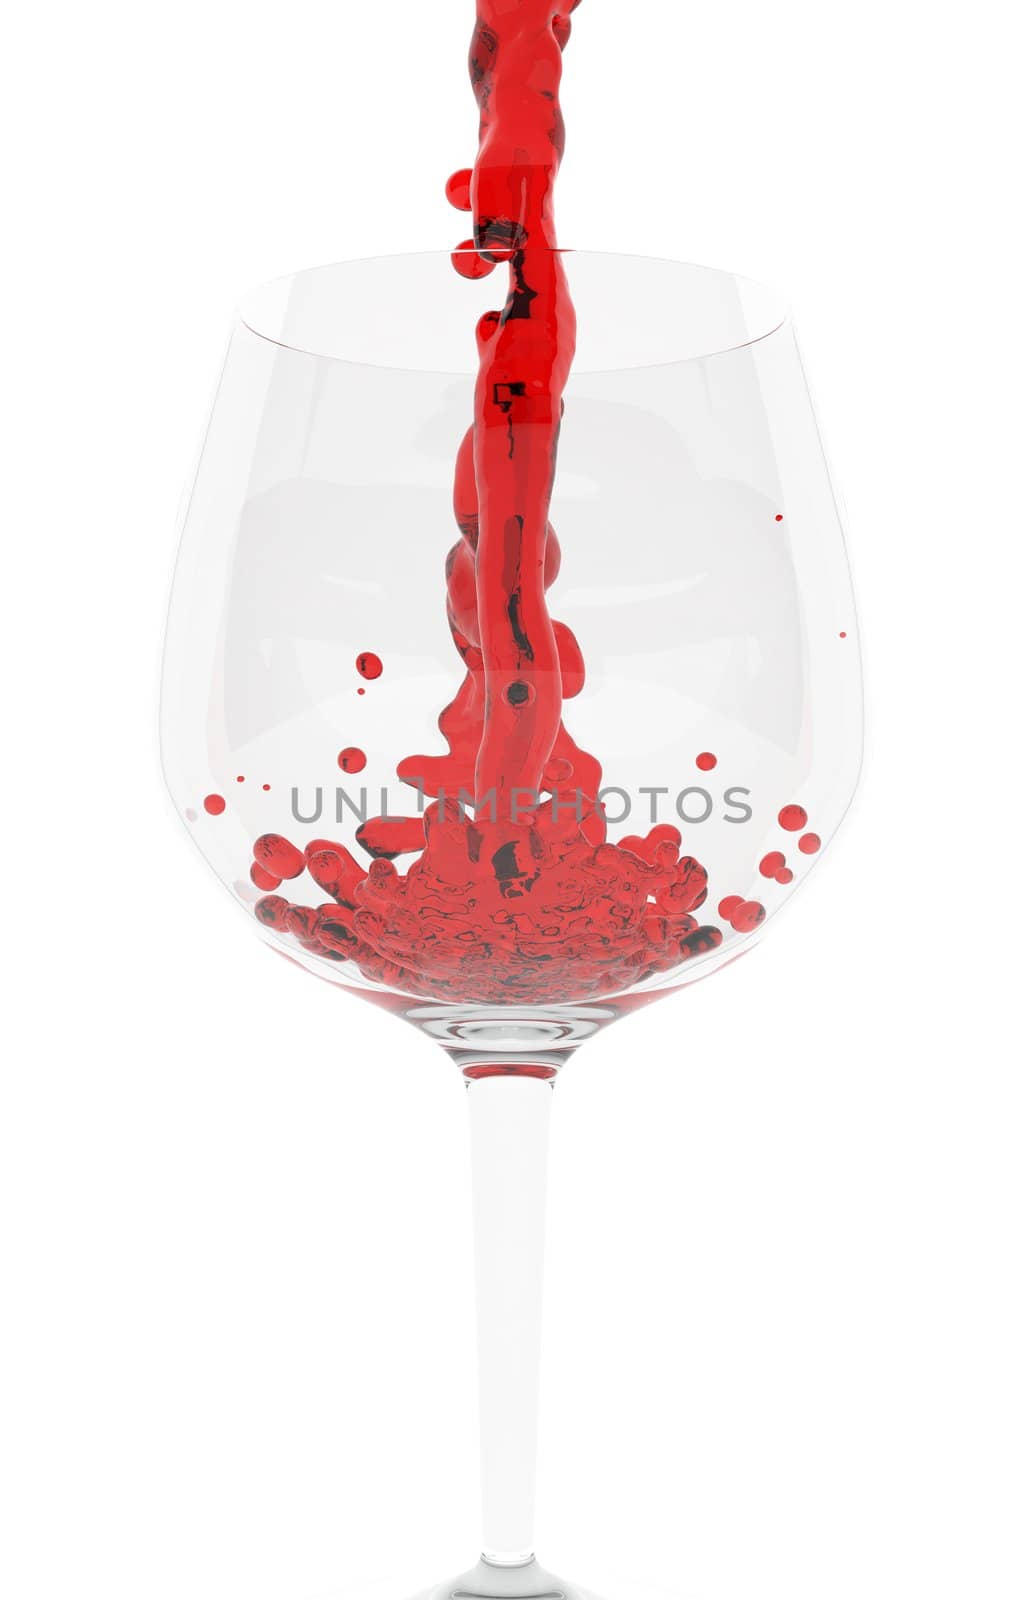 glass_of_red_wine by Shevlad